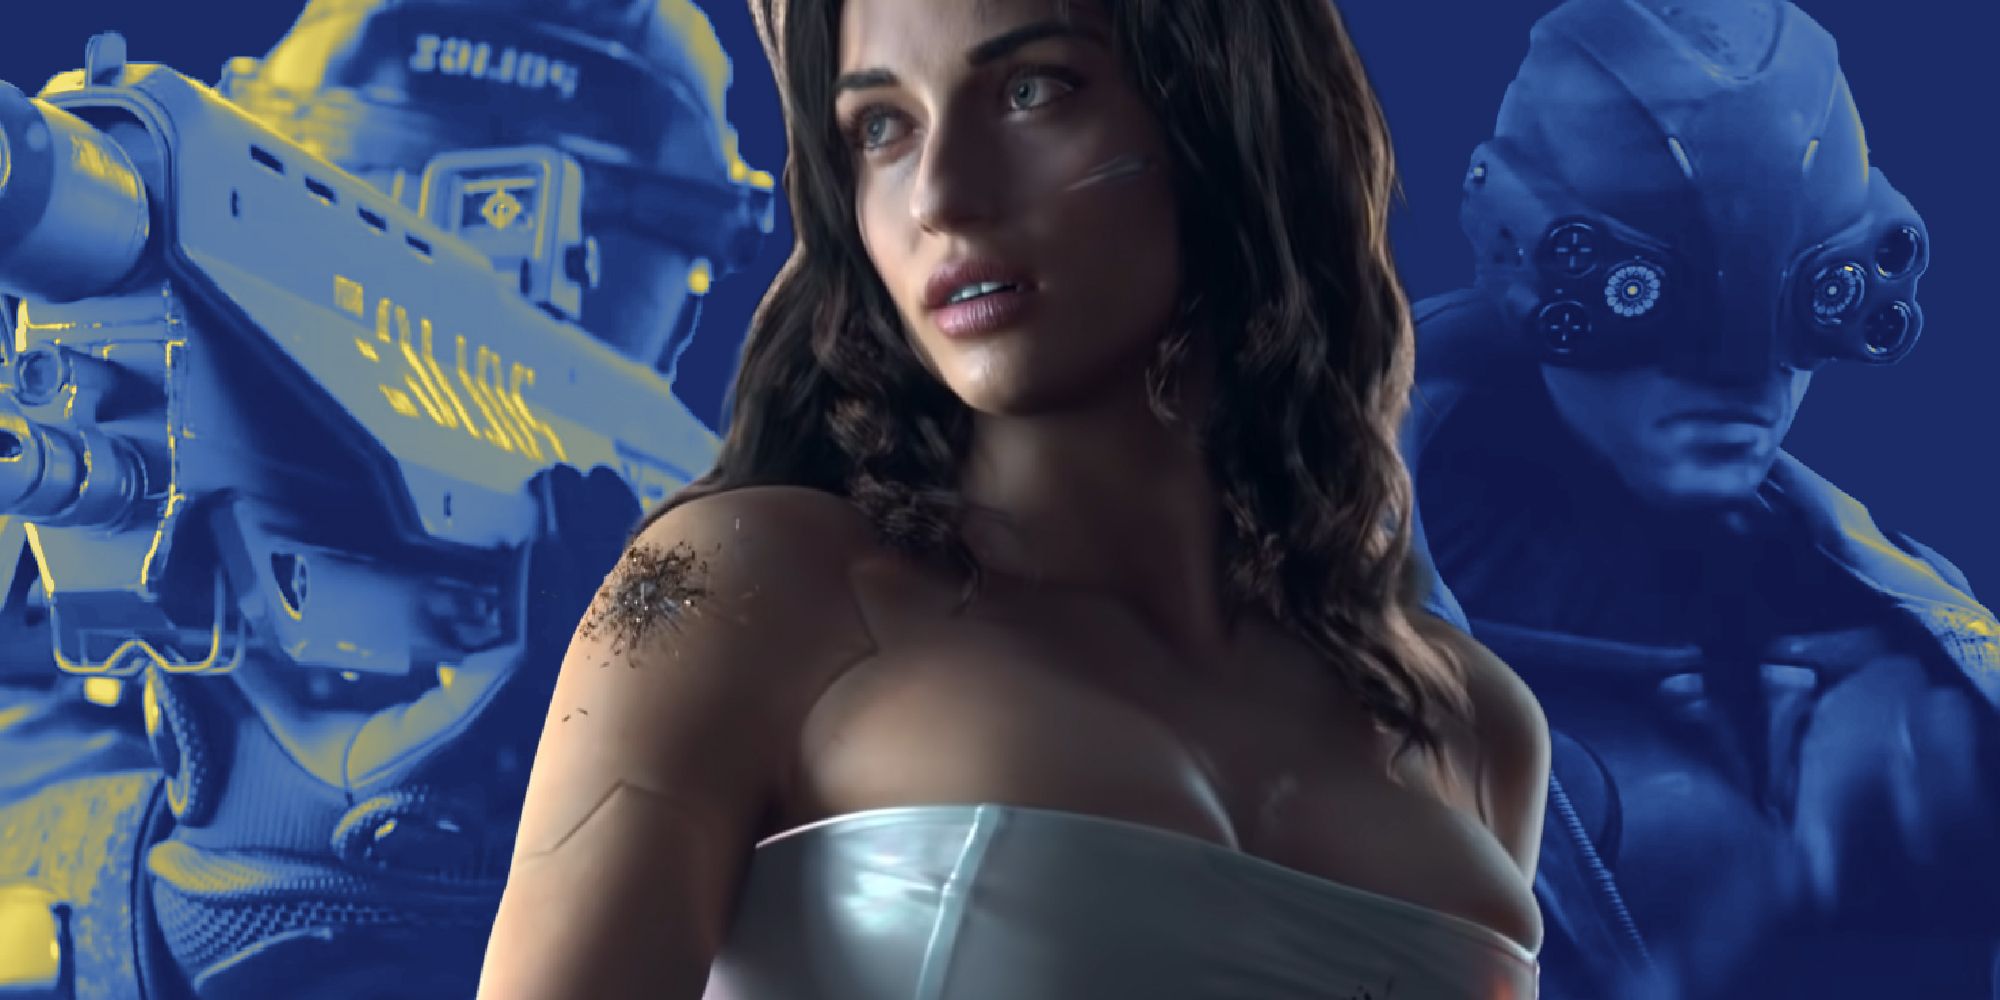 the woman from the Cyberpunk 2077 first trailer with cops around her